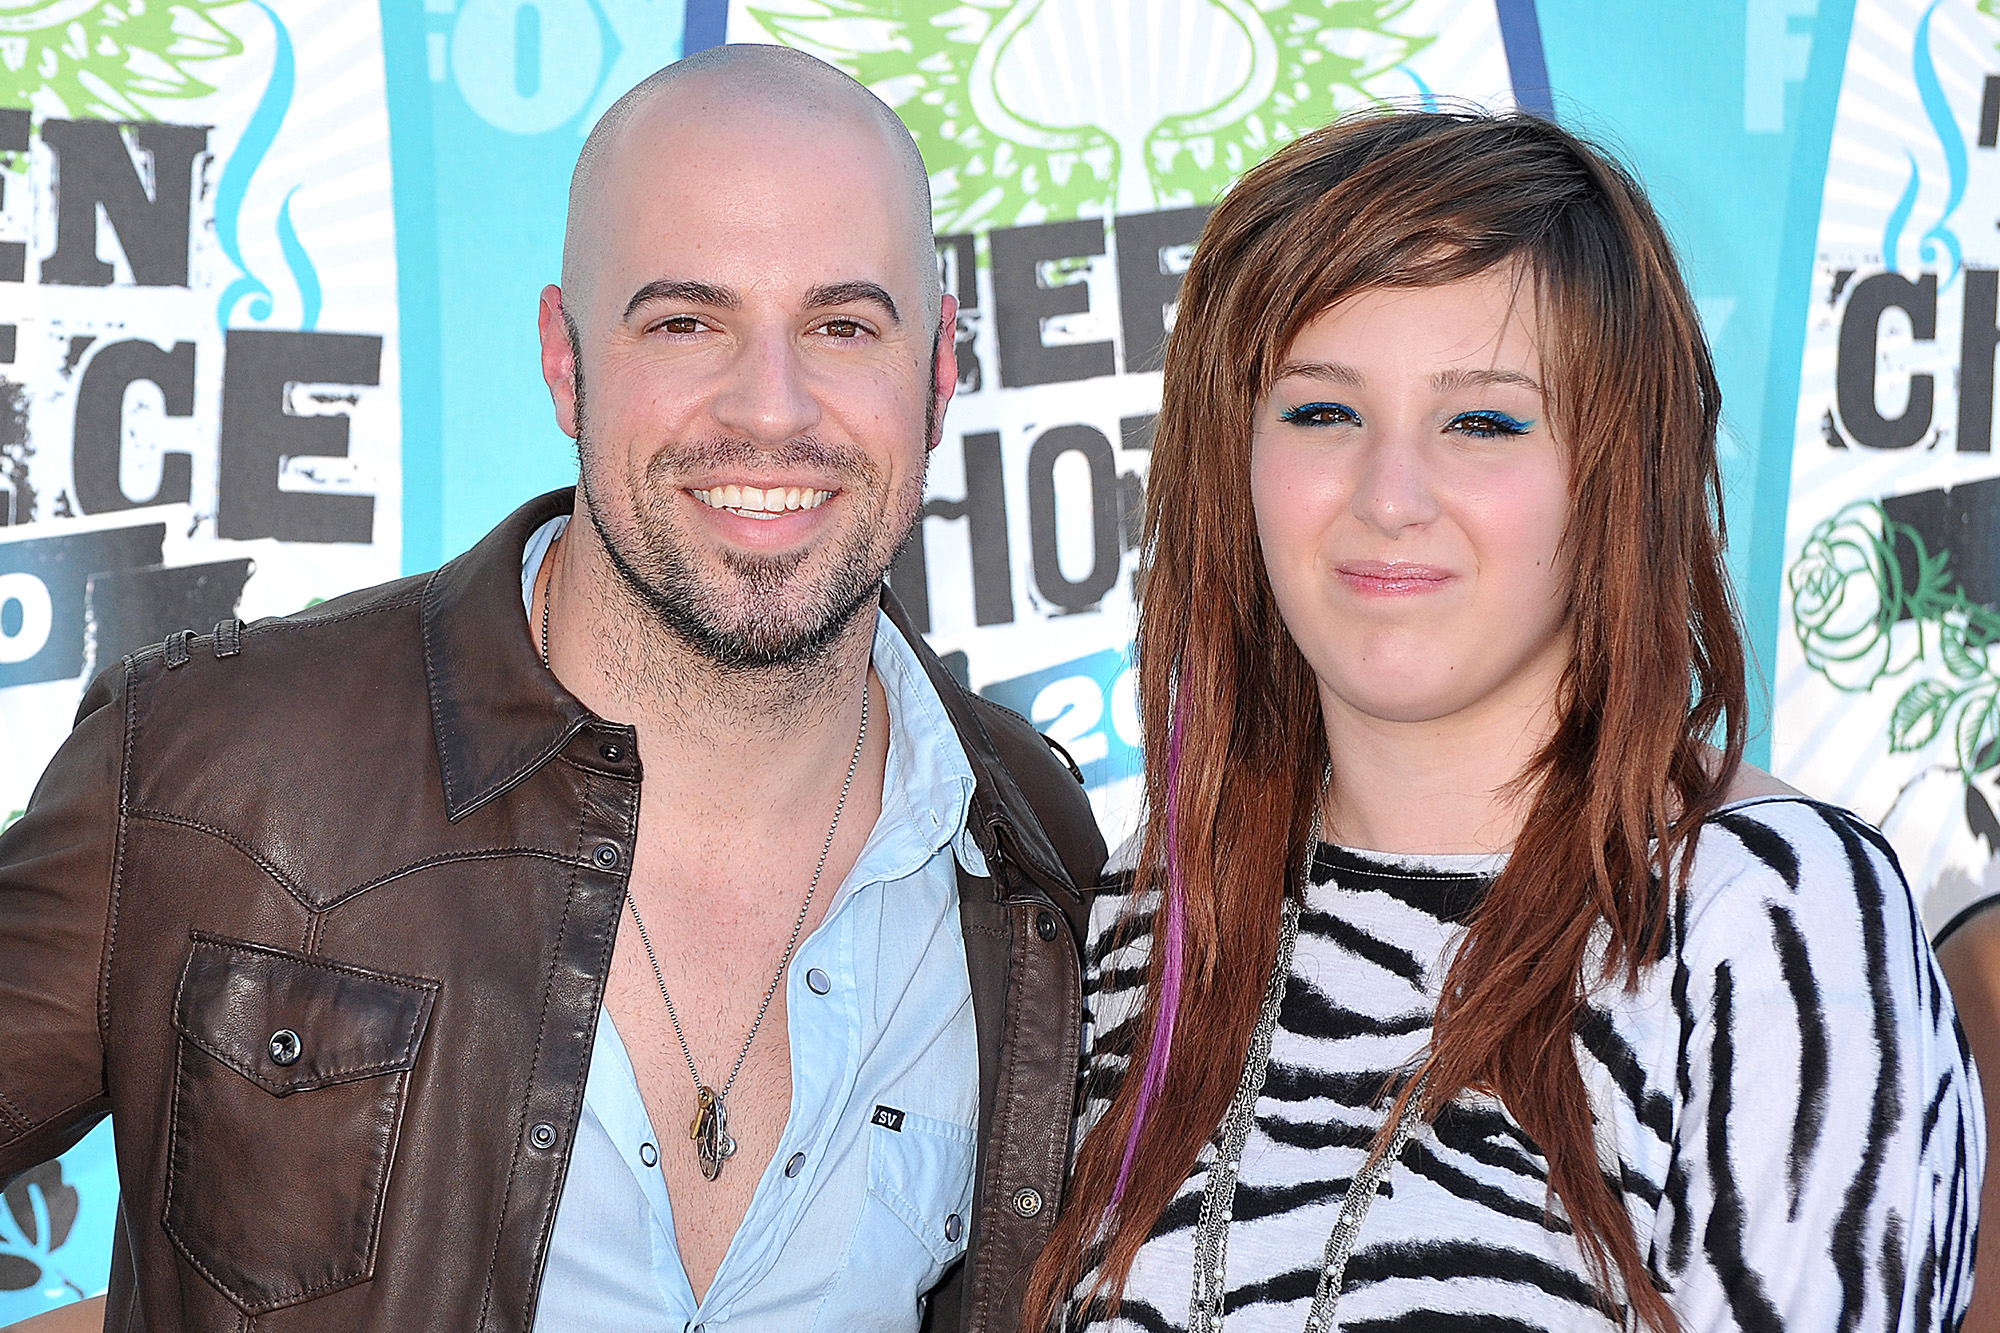 Daughtry Wallpapers